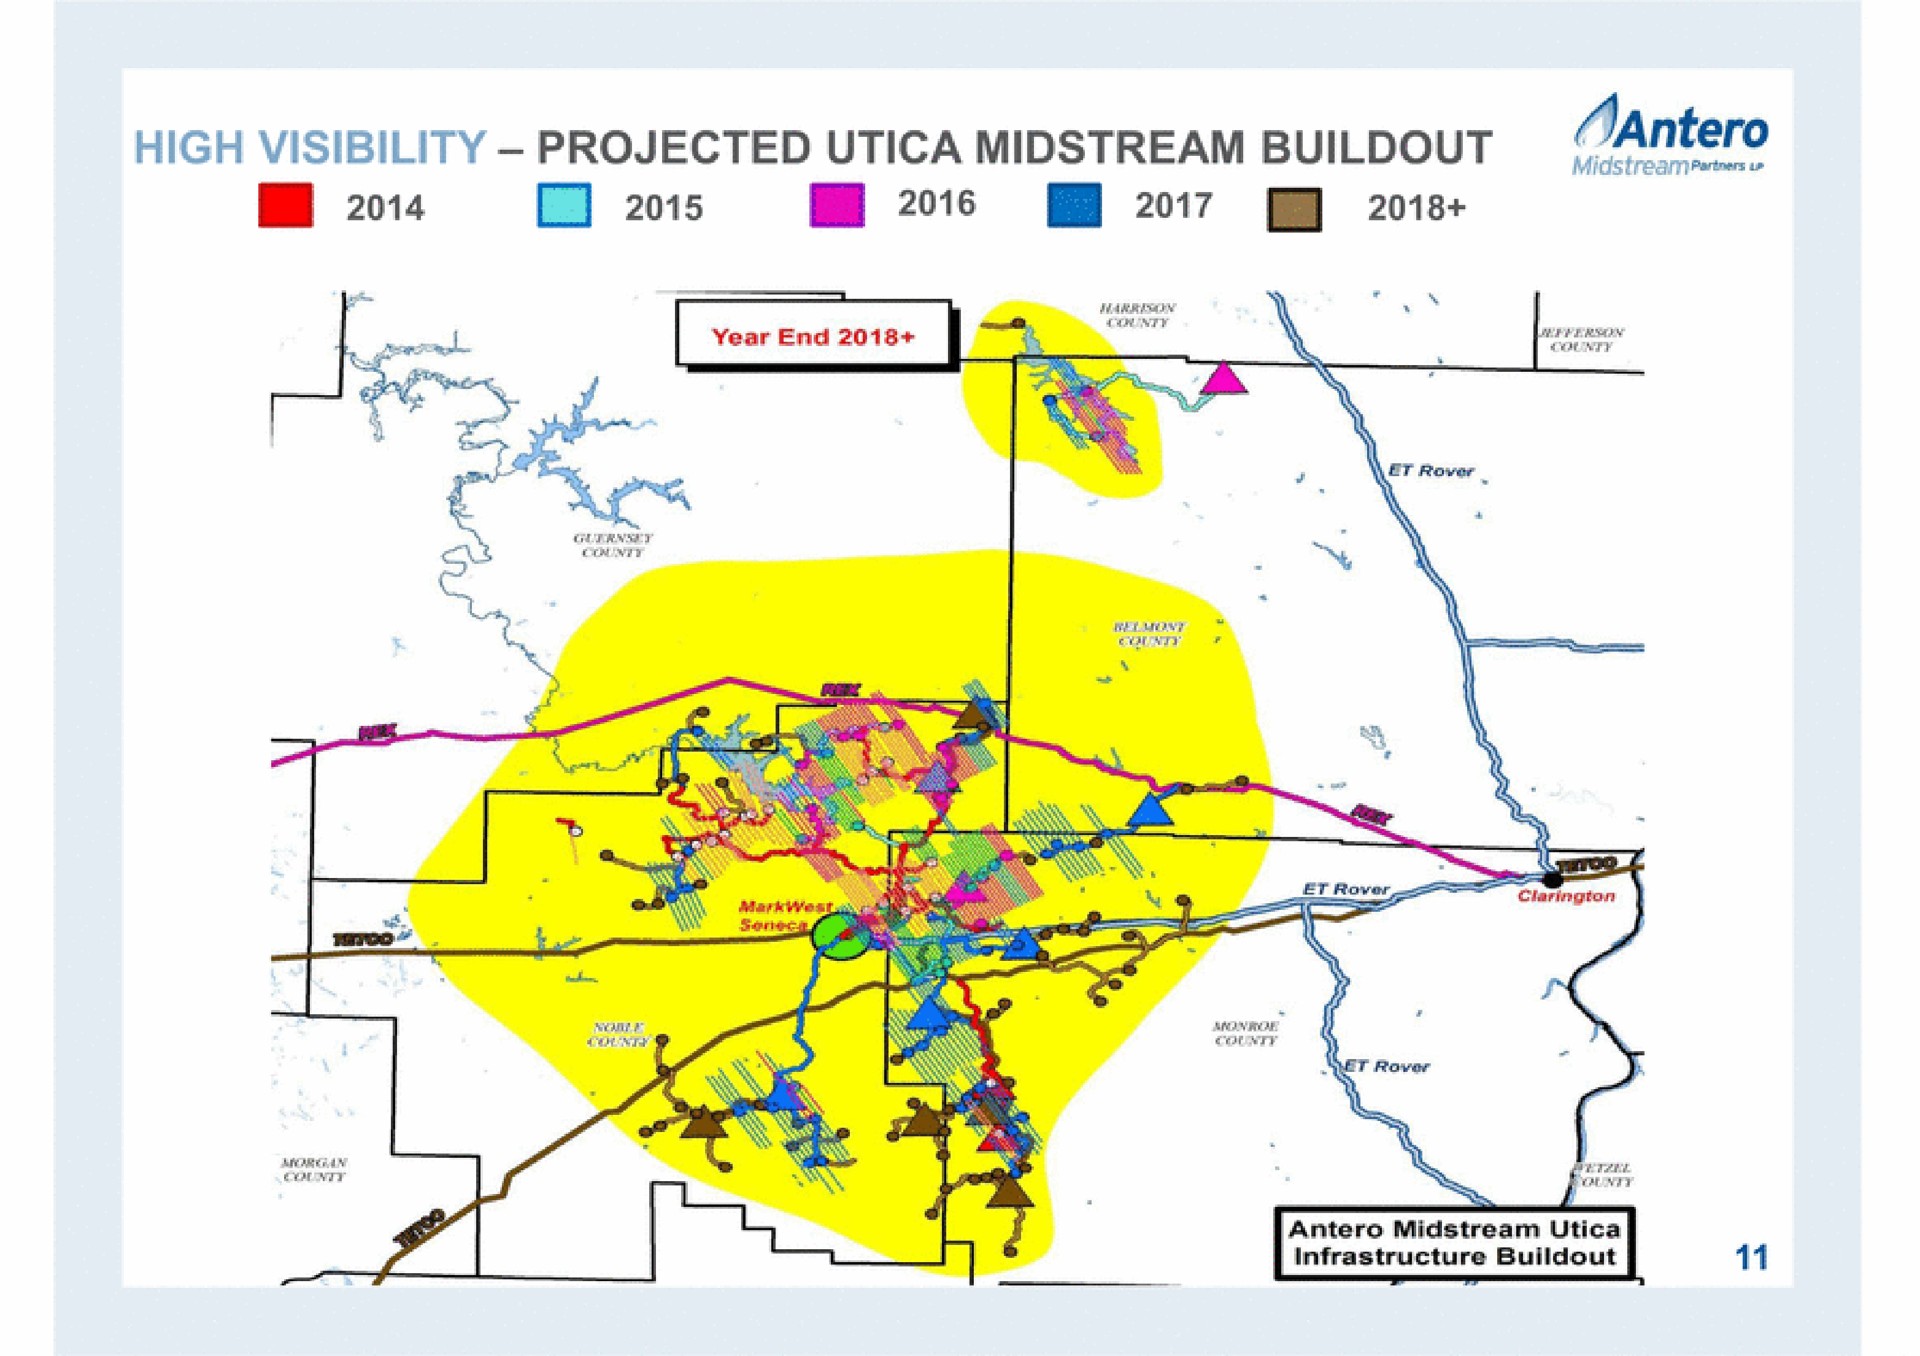 high visibility projected midstream me | Antero Midstream Partners